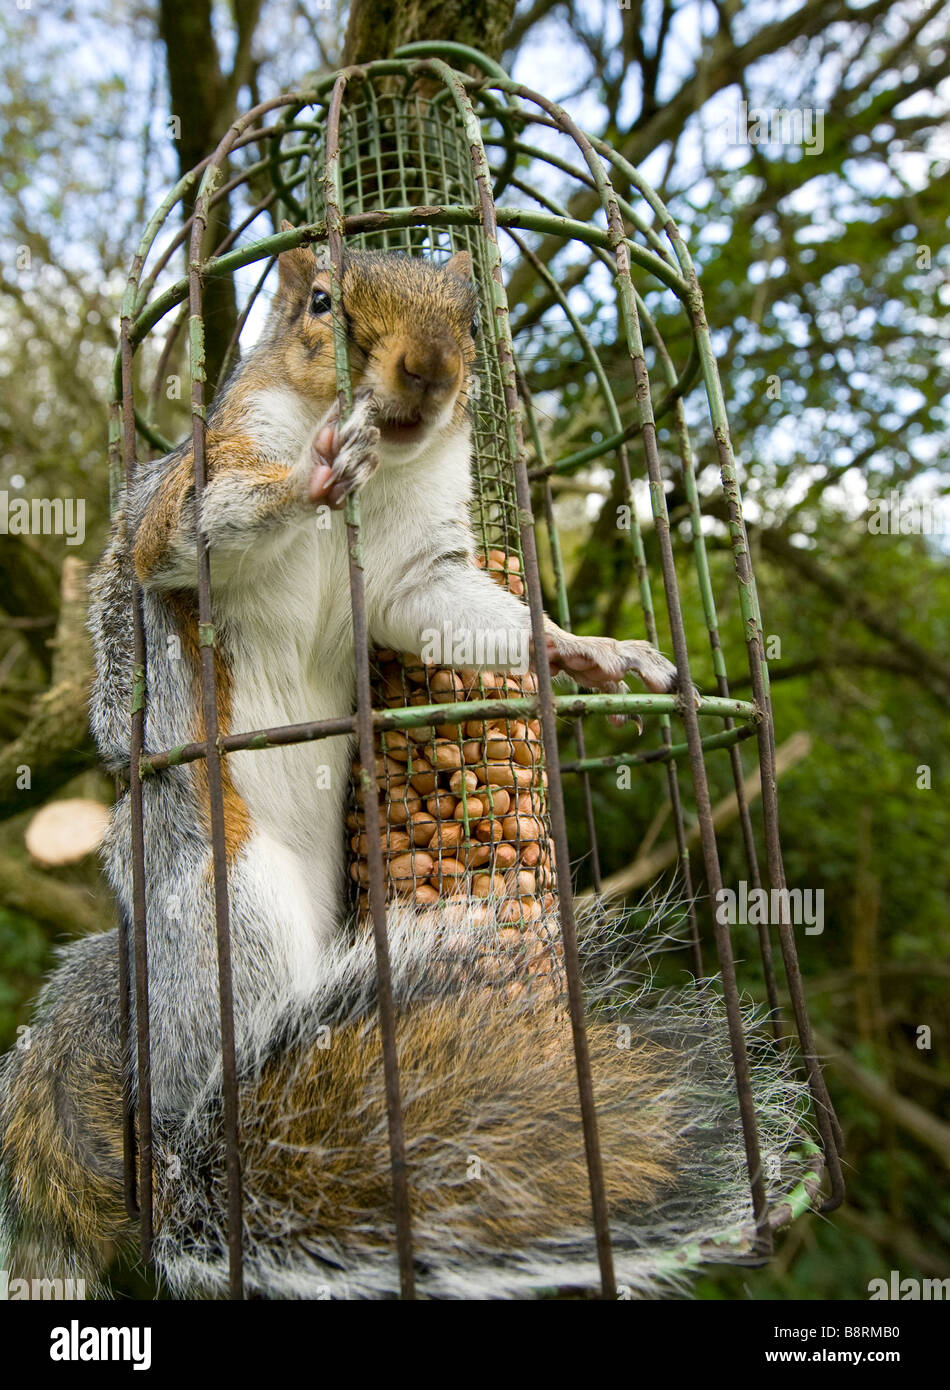 Squirrel Proof Bird Feeder High Resolution Stock Photography and Images -  Alamy